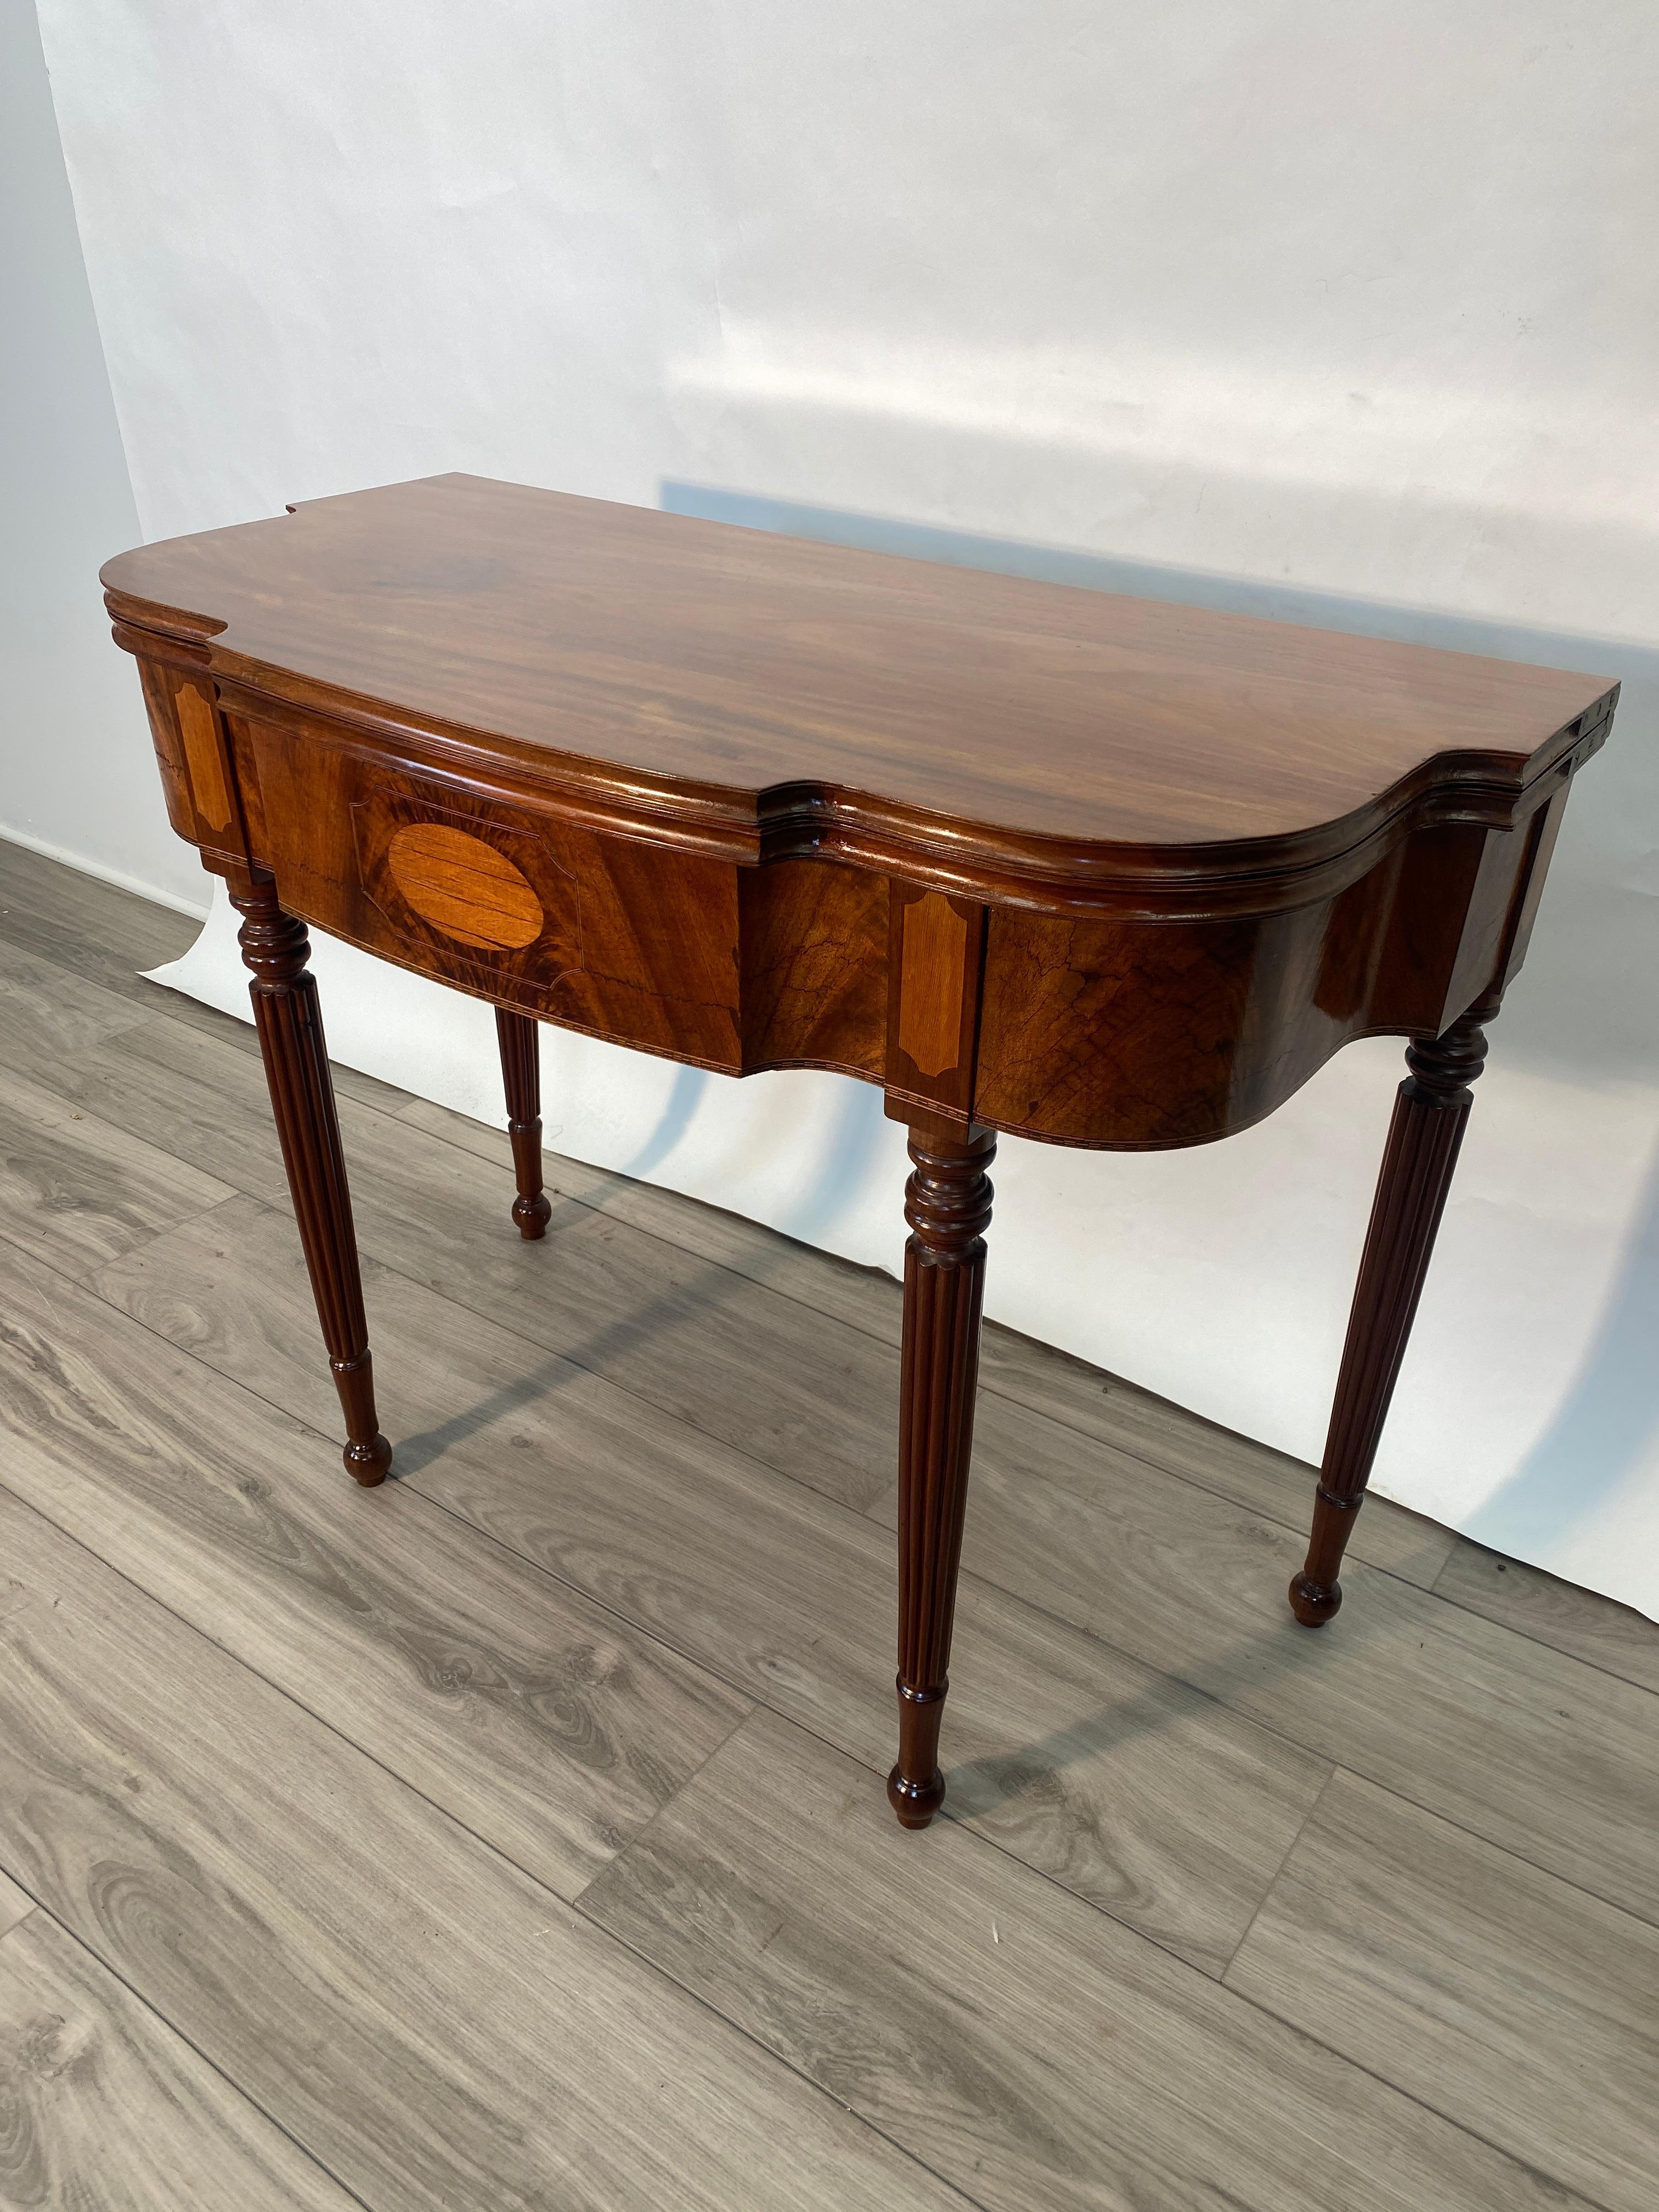 Polished 19th Century Flamed Mahogany Flip Top Sheraton Style Side Table For Sale